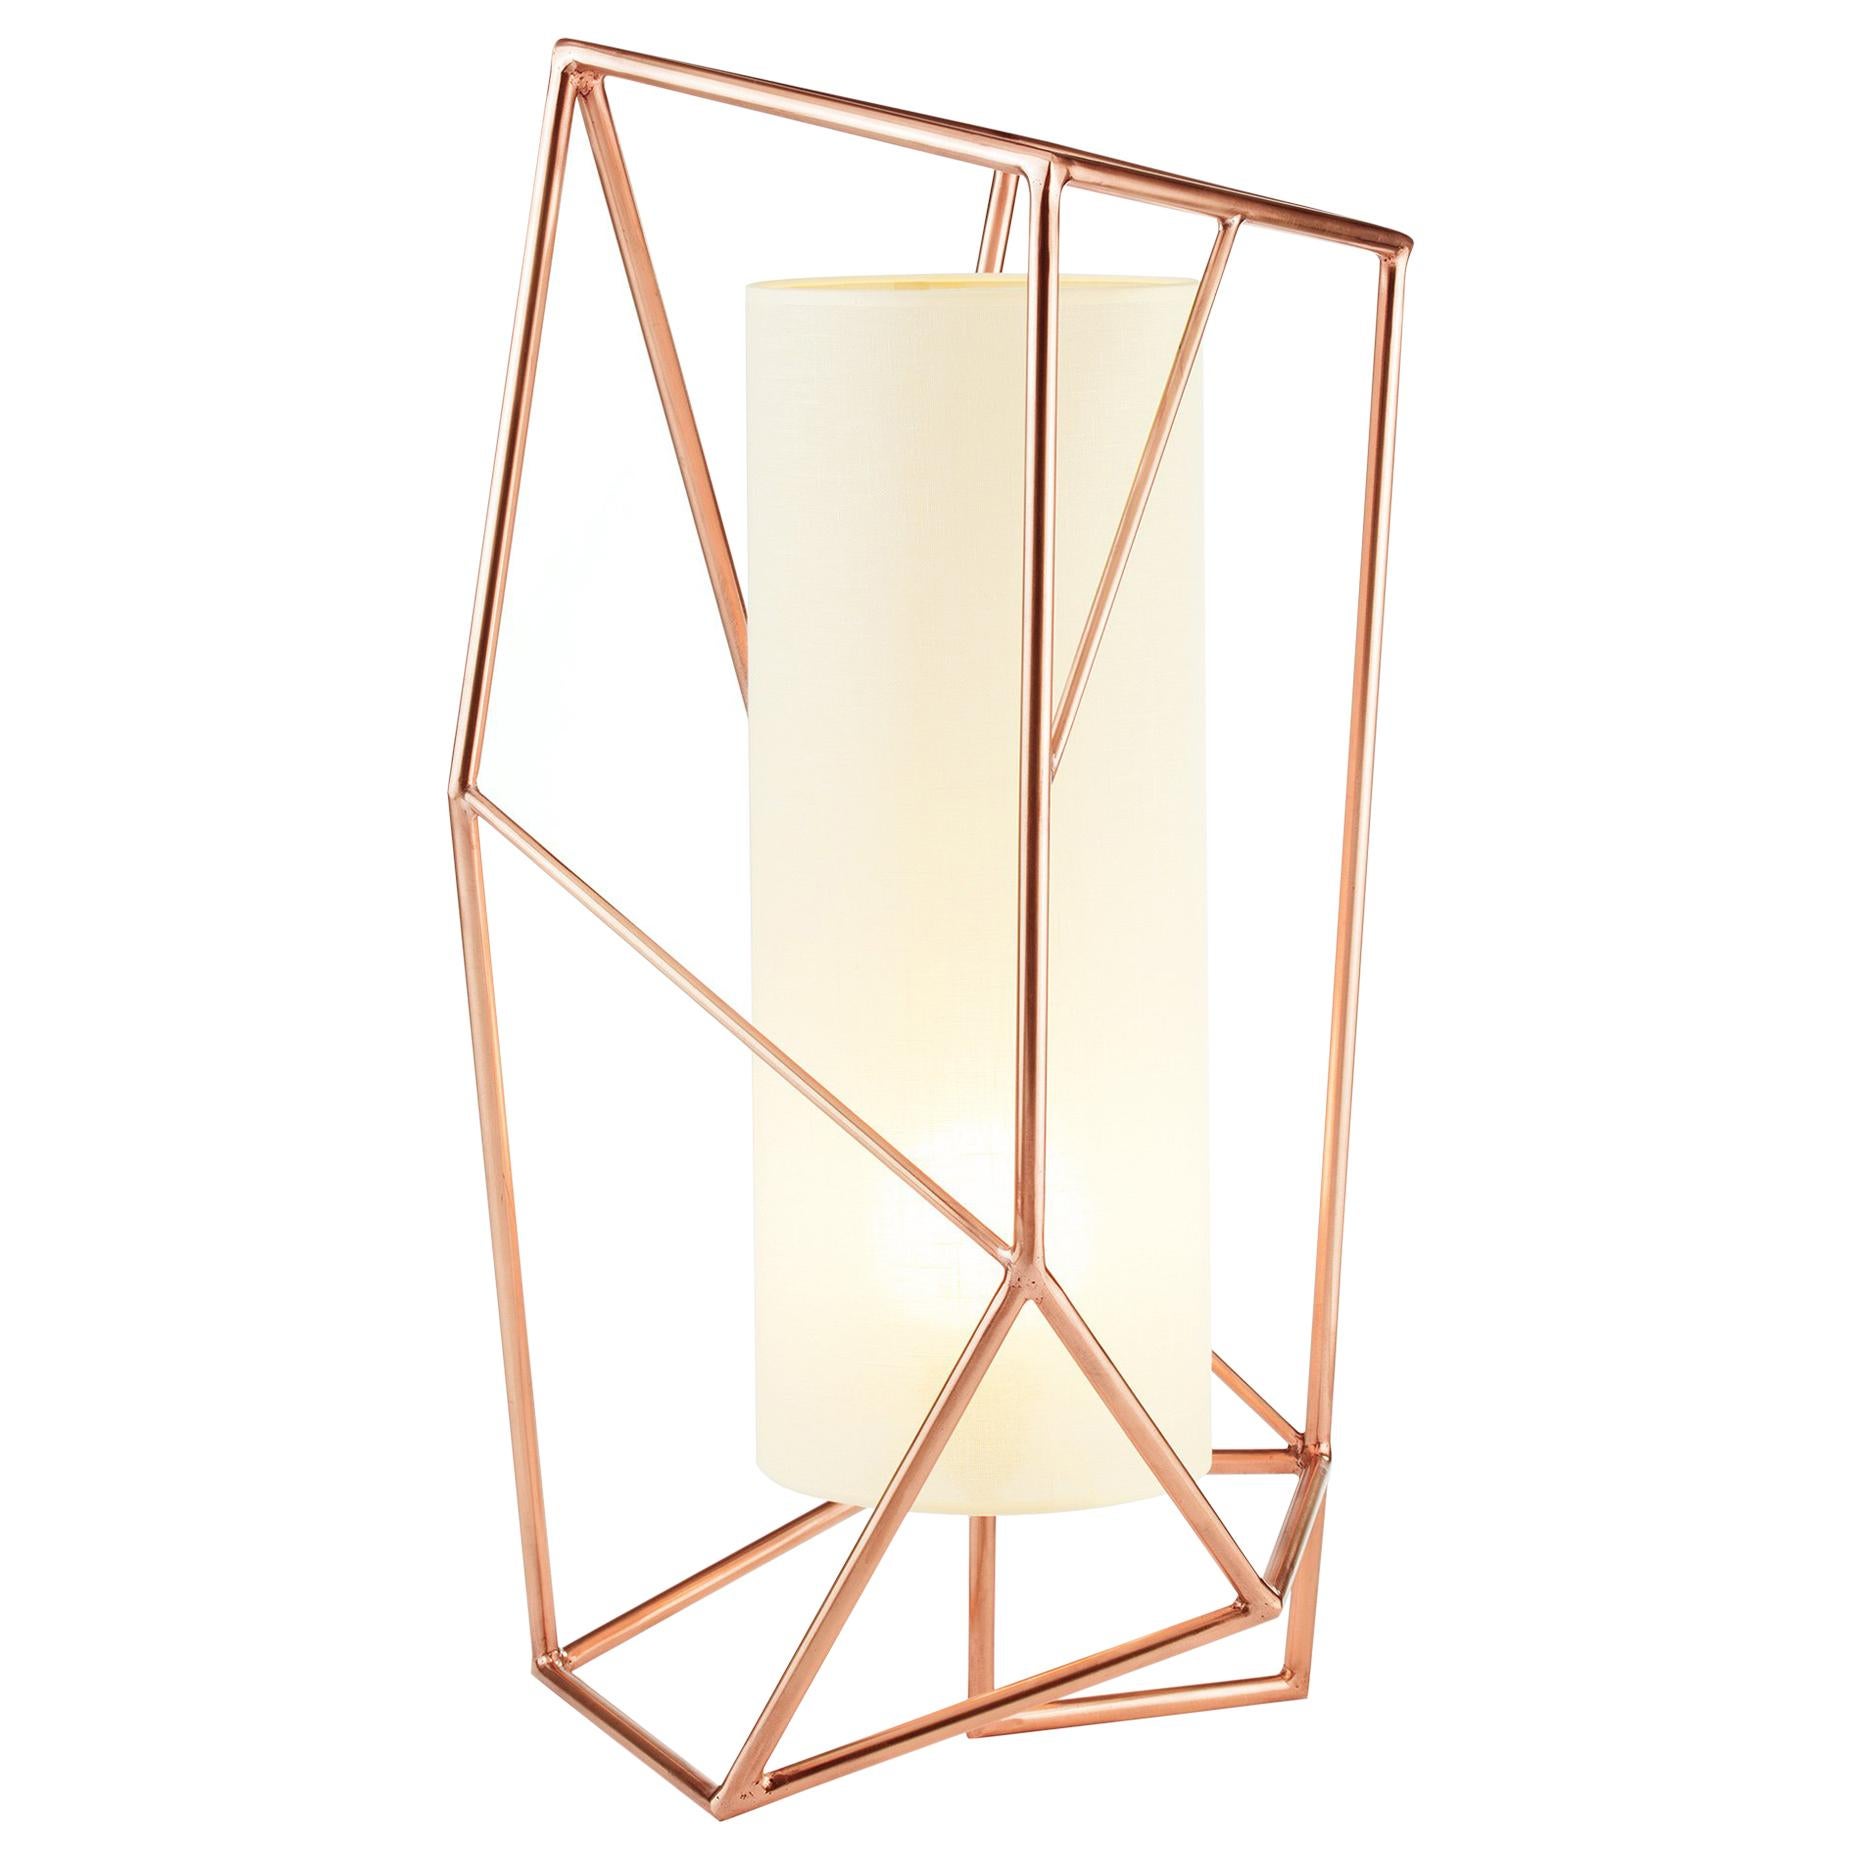 Art Deco Inspired Star Table Lamp Polished Copper and Linen Shade